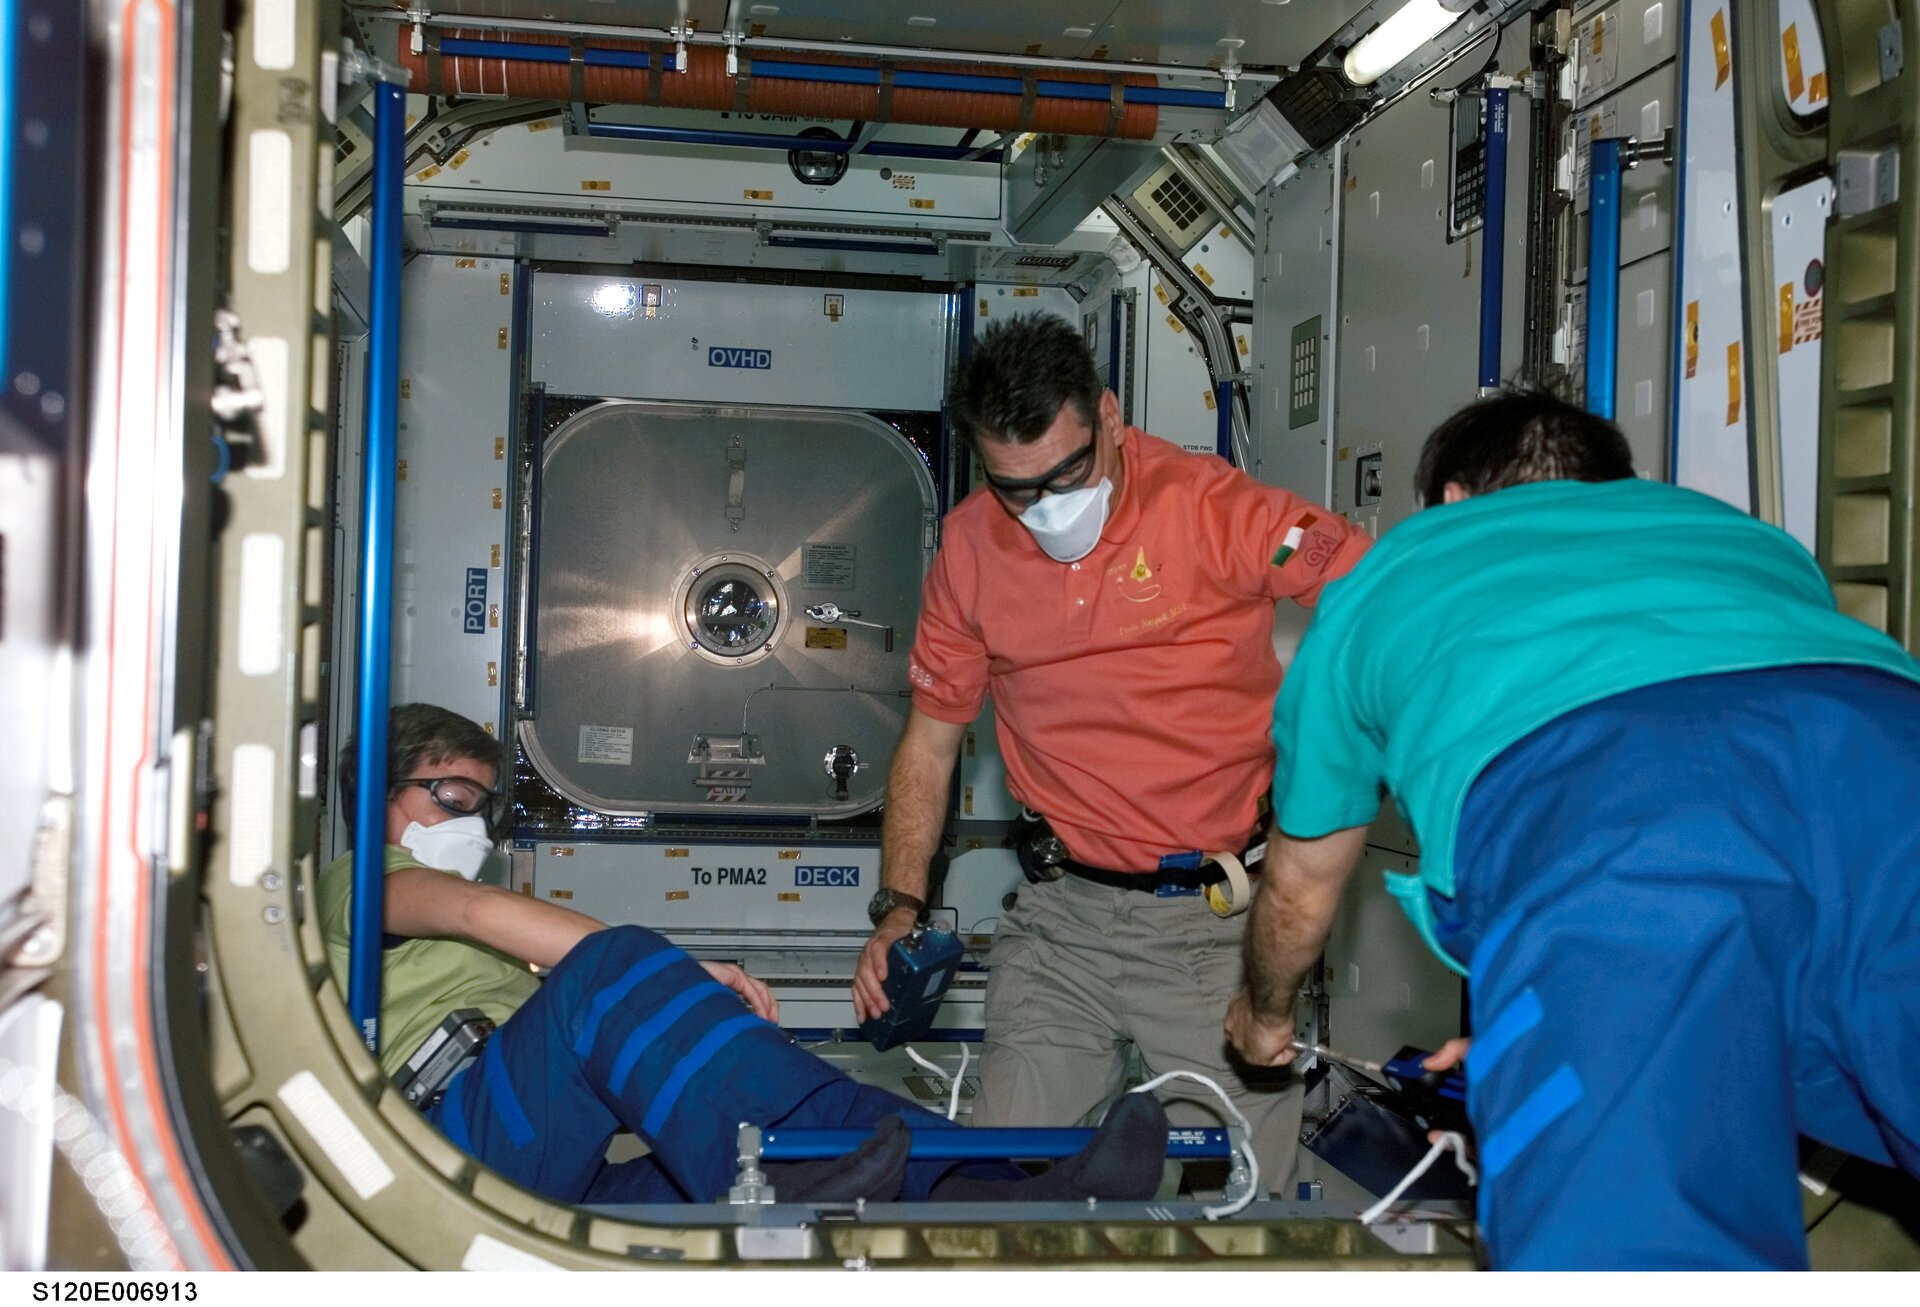 Nespoli and Whitson wore protective goggles and face masks to protect themselves in case of any loose flying objects inside the new module